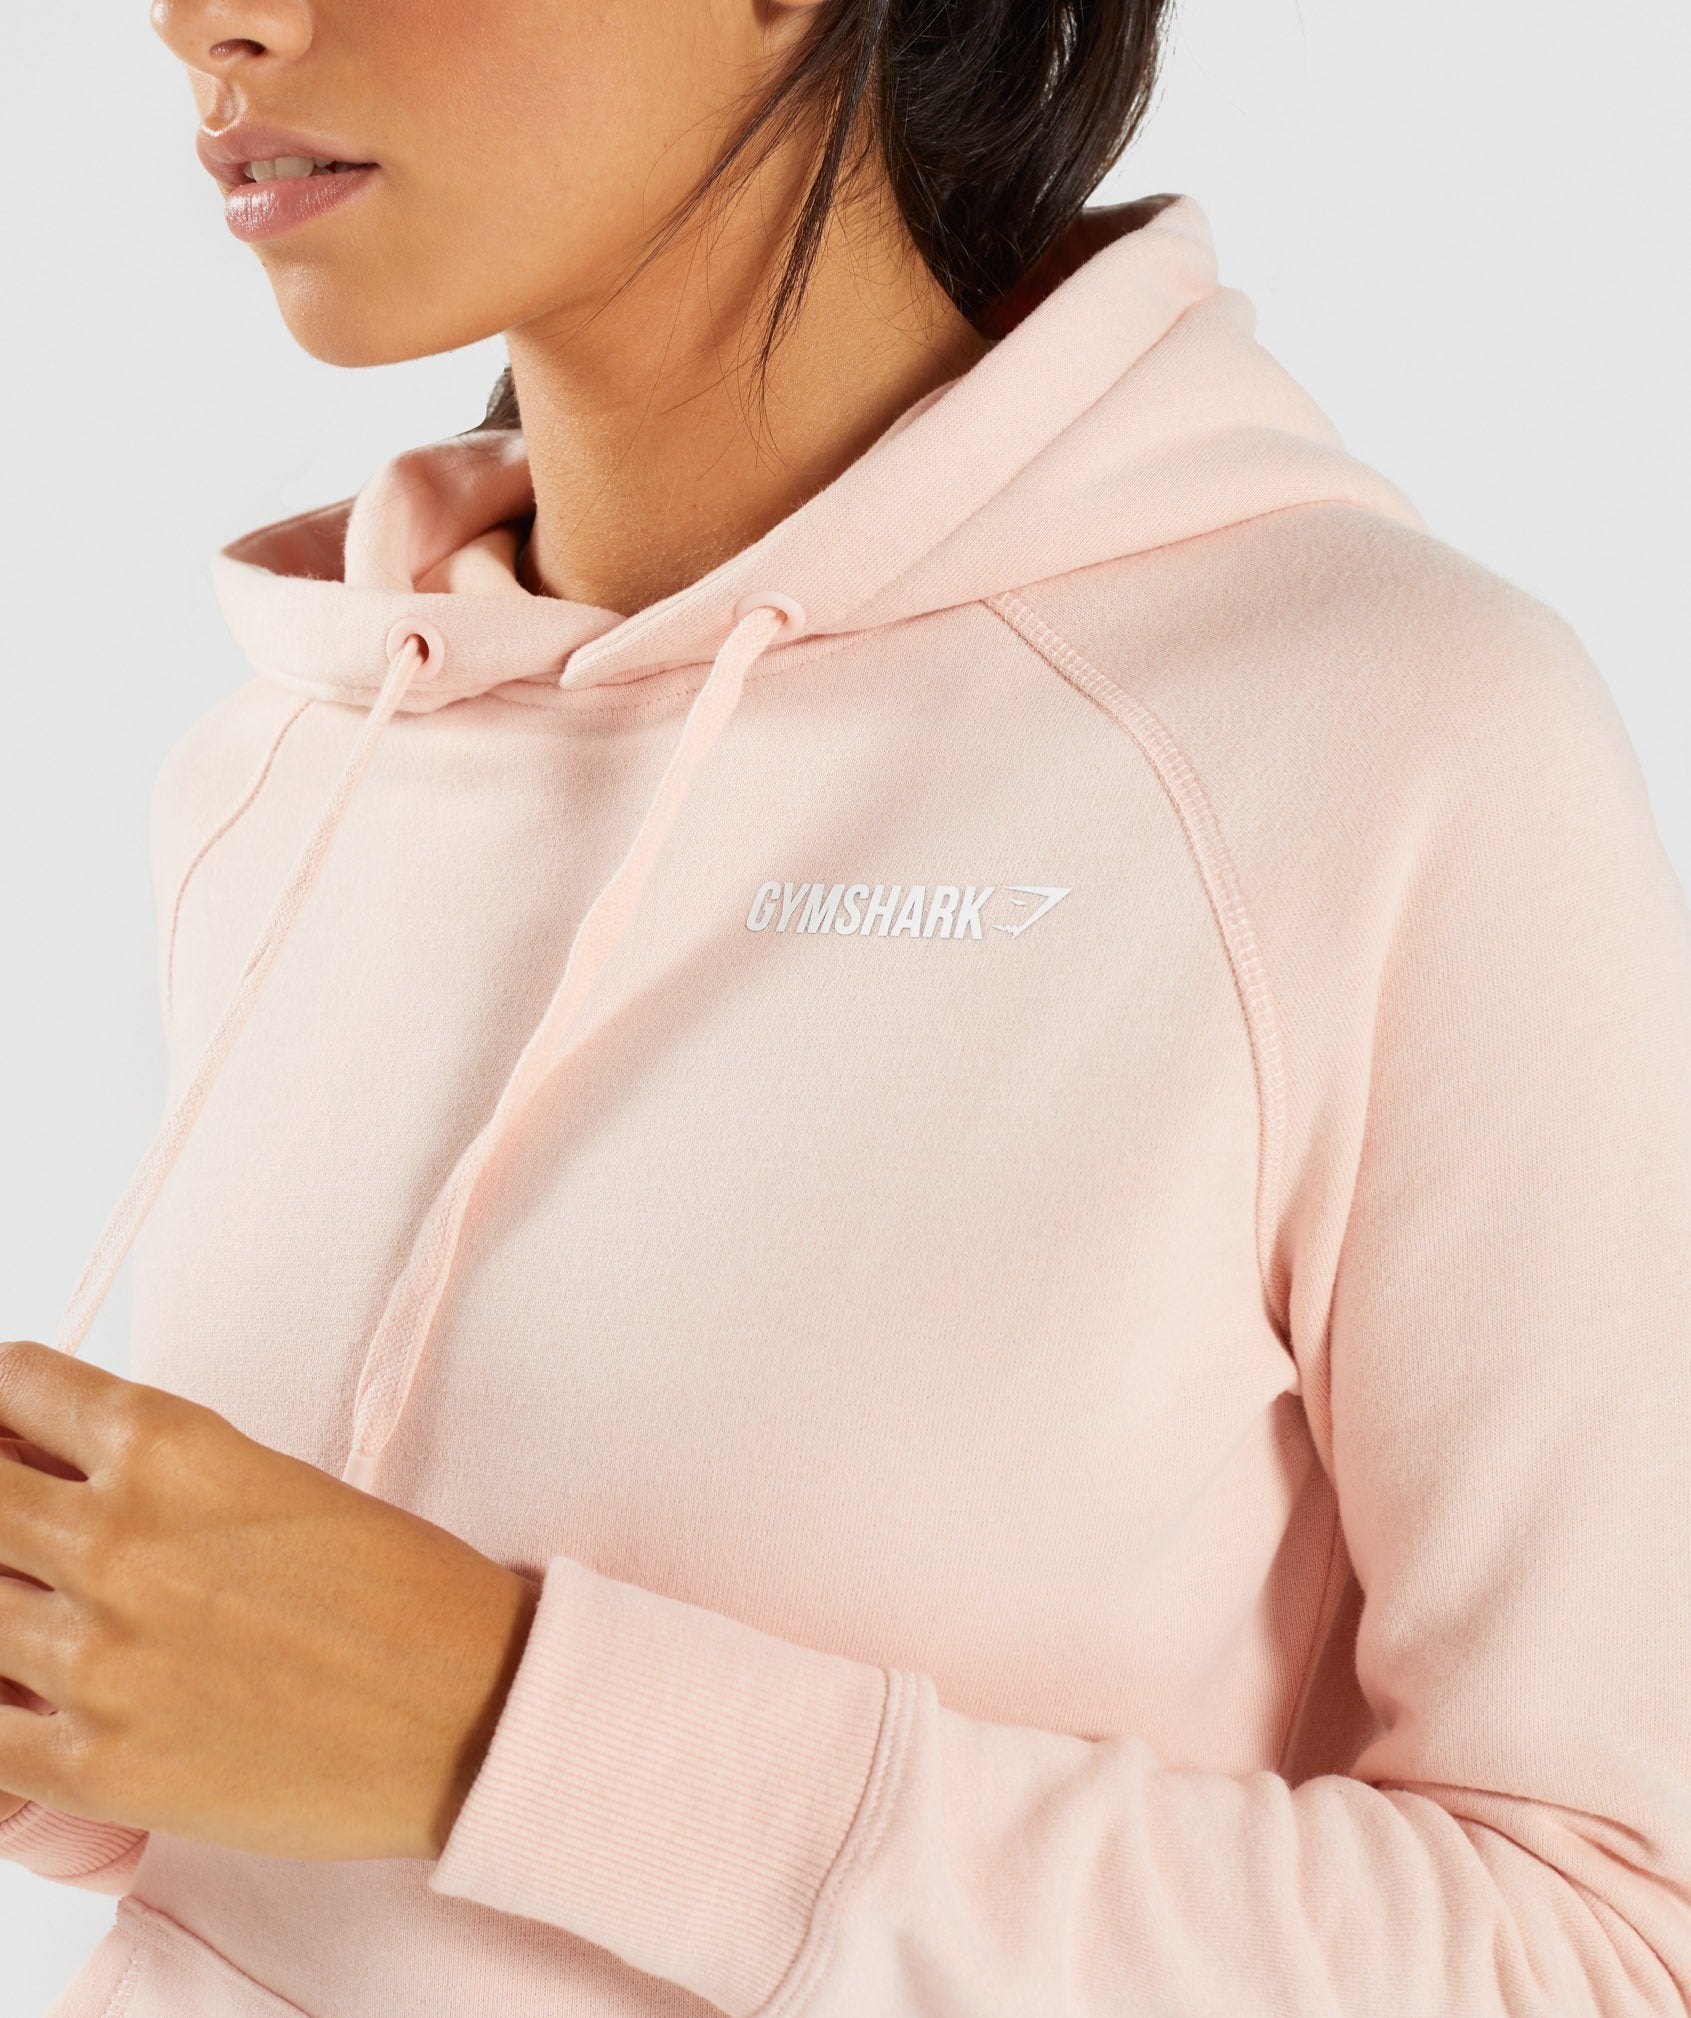 Women's Crest Hoodie in Blush Nude - view 4